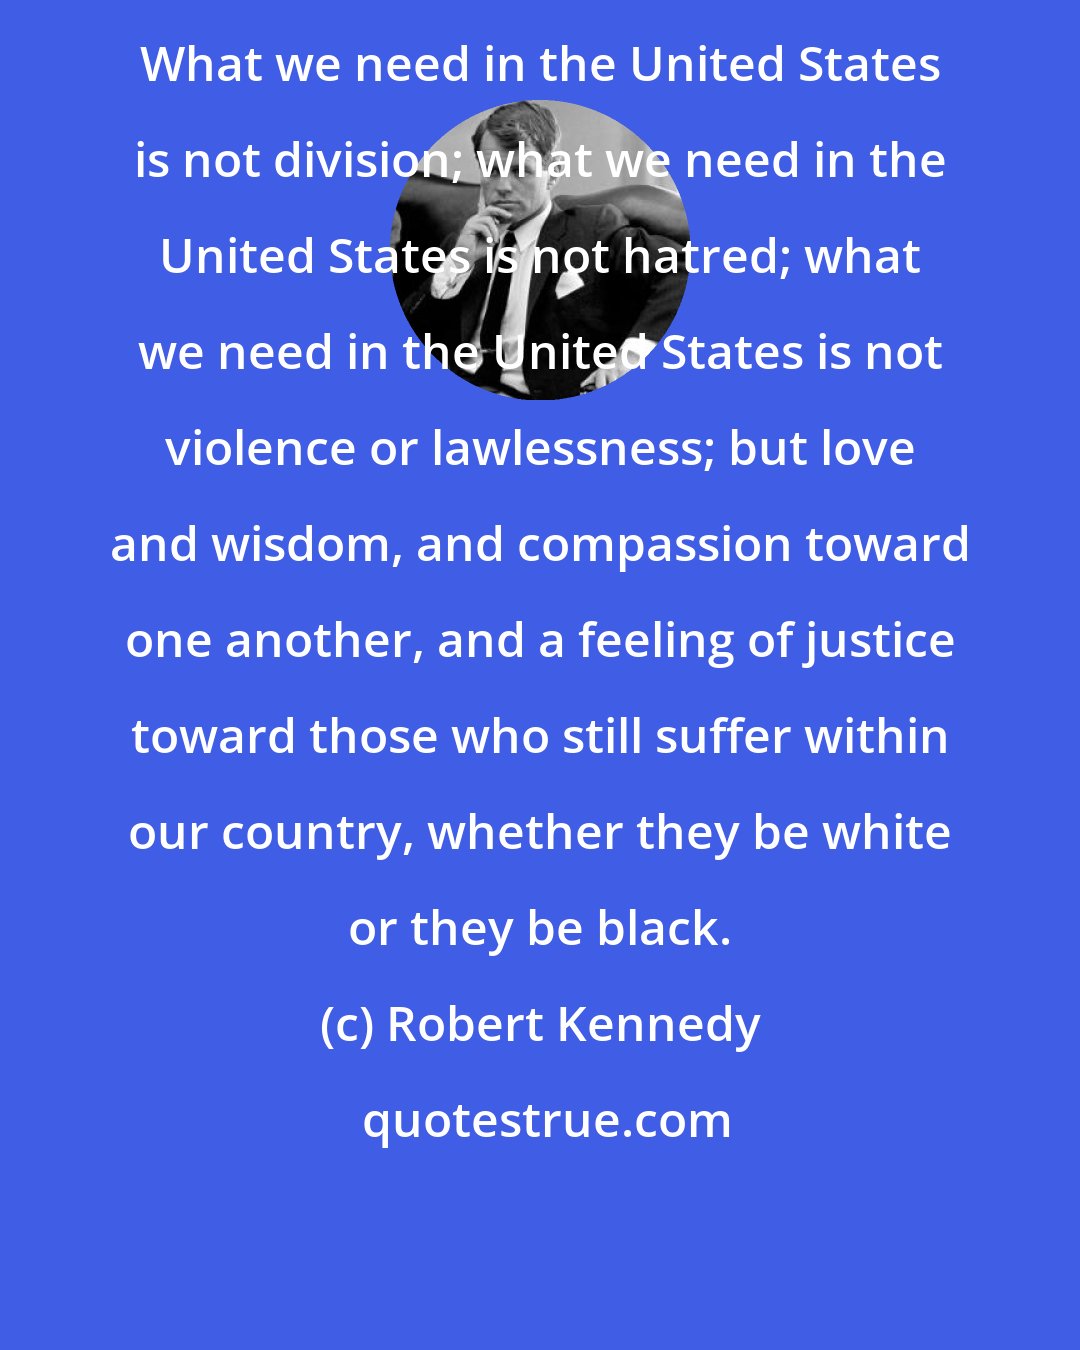 Robert Kennedy: What we need in the United States is not division; what we need in the United States is not hatred; what we need in the United States is not violence or lawlessness; but love and wisdom, and compassion toward one another, and a feeling of justice toward those who still suffer within our country, whether they be white or they be black.